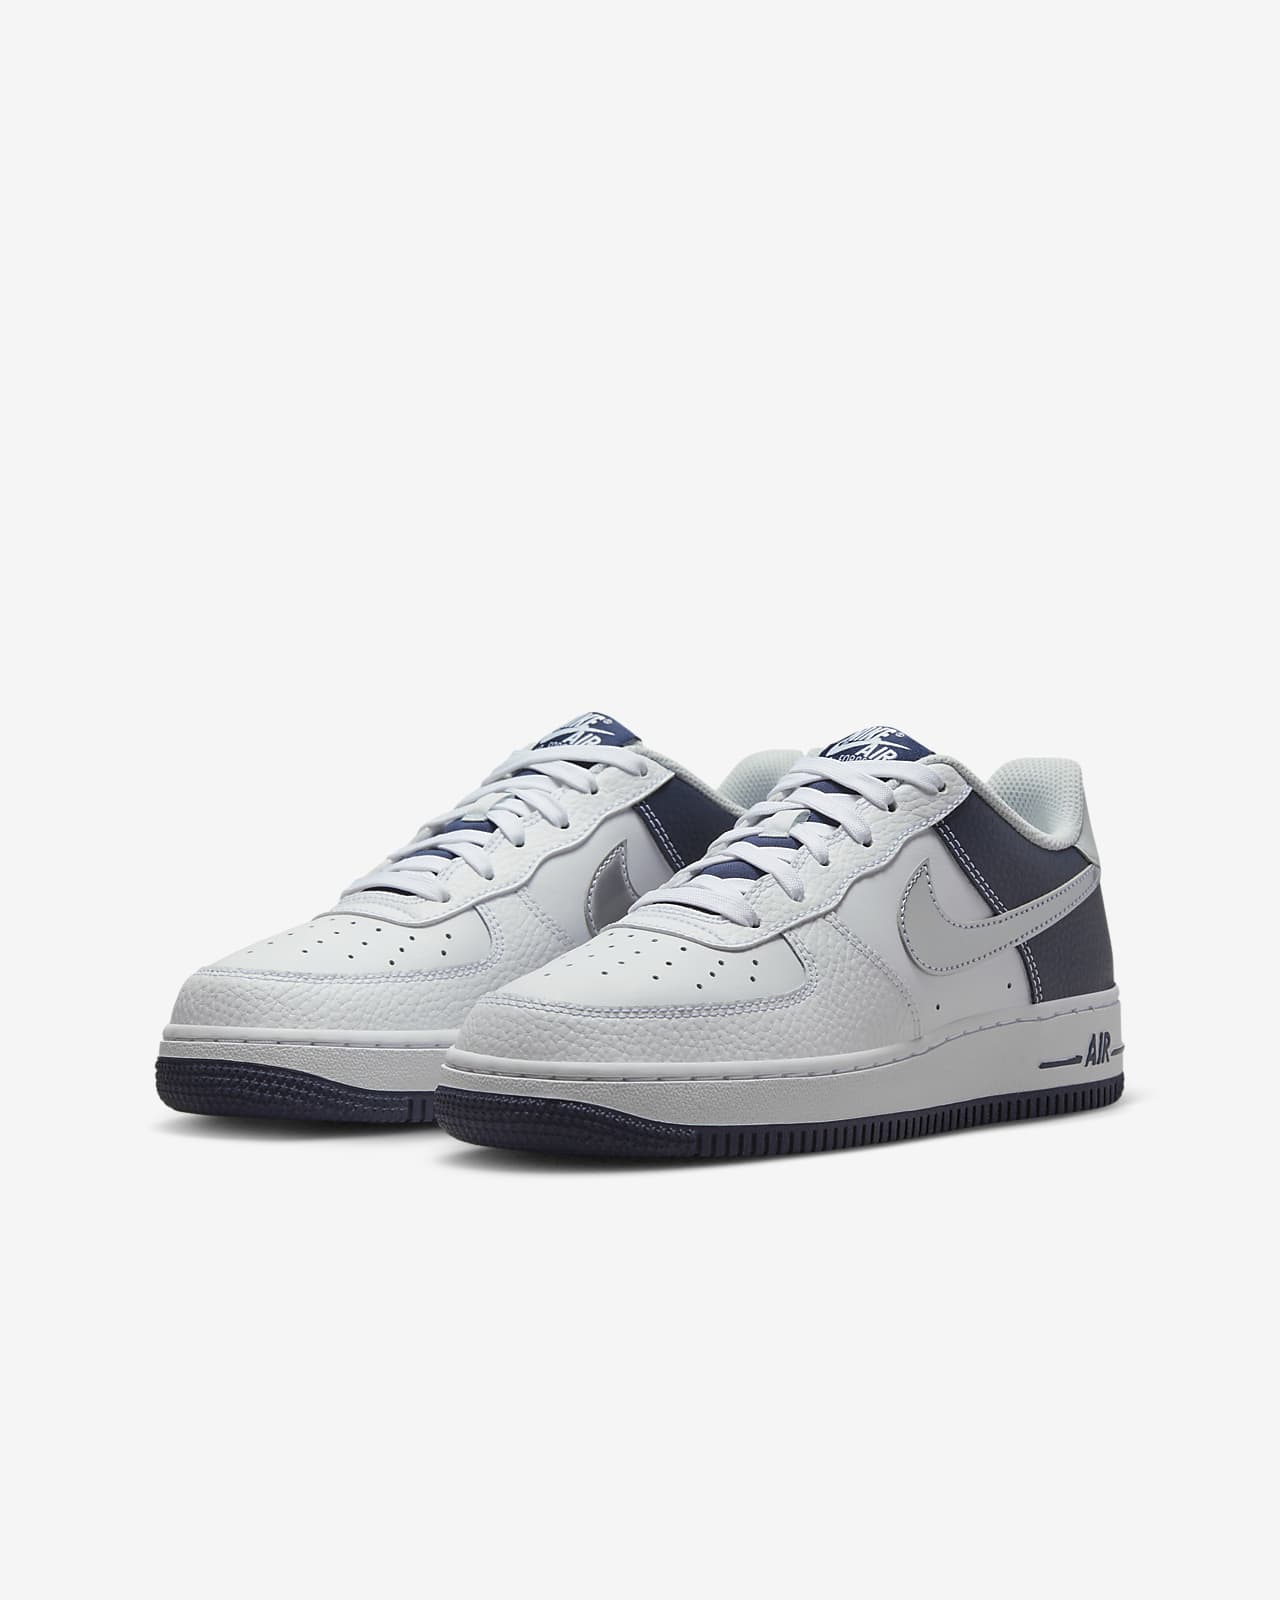 Nike Force 1 LV8 1 Younger Kids' Shoes. Nike ID